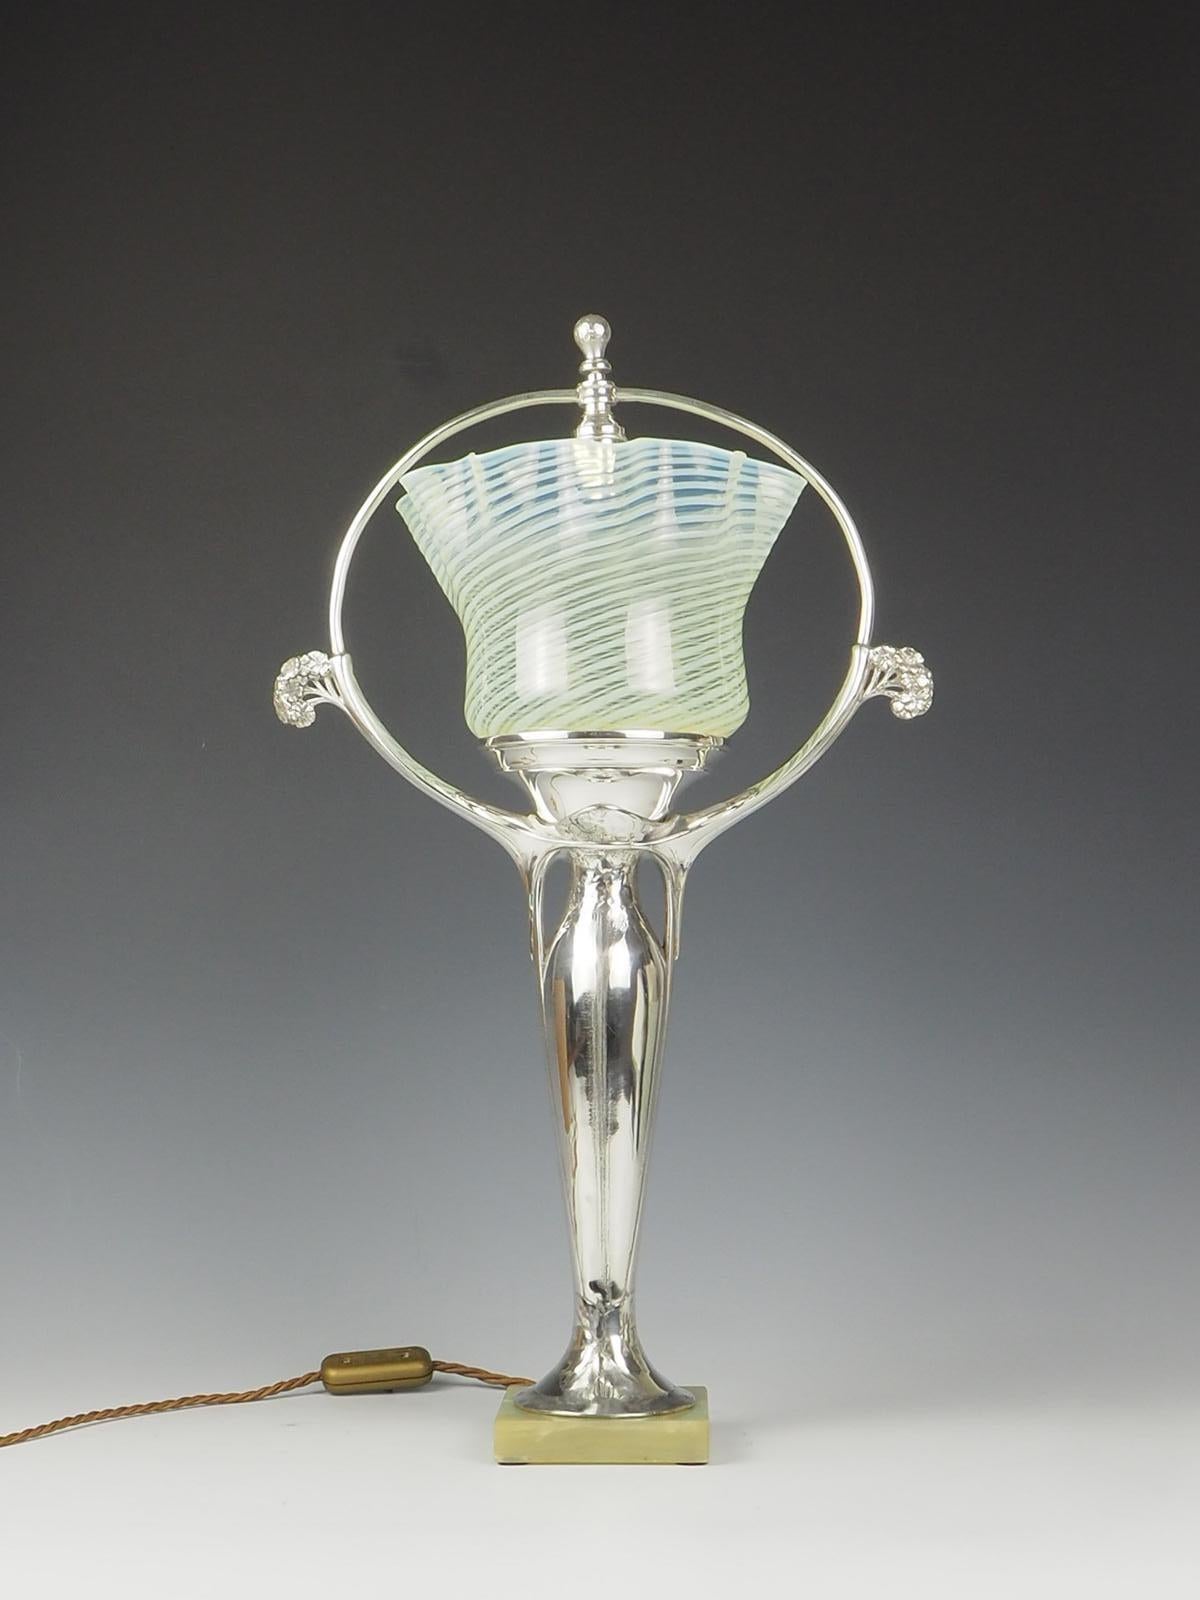 Description

Exquisite Art Nouveau Silver Plate Table Lamp featuring a Vaseline Shade signed by M.C. The lamp stands elegantly on a marble base, adding a touch of sophistication.

The unique design of a tree shape adds a whimsical and artistic